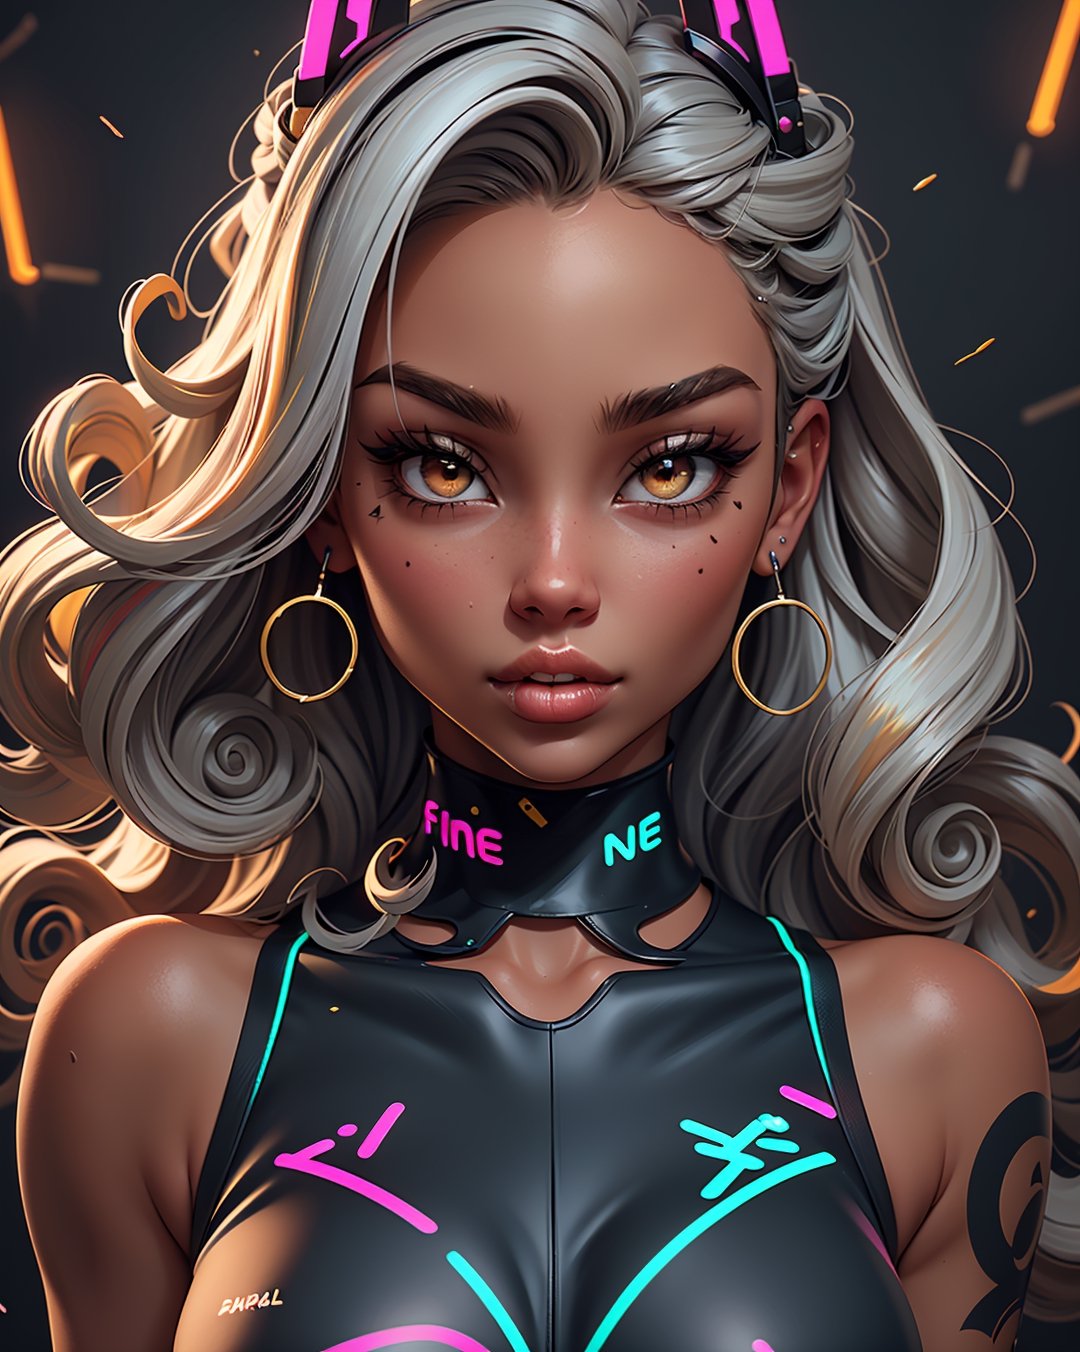 1 girl, symmetrical face, perfect brown eyes, sparks, (female hair made of fine multicolored neon curls:1.5), (long thin hair made of multicolored neon strands flowing down the body), smoky skin, realism, (in a colorful candy world:1.2), ultra high resolution, 8k, HDr, art, high detail, , art,shodanSS_soul3142